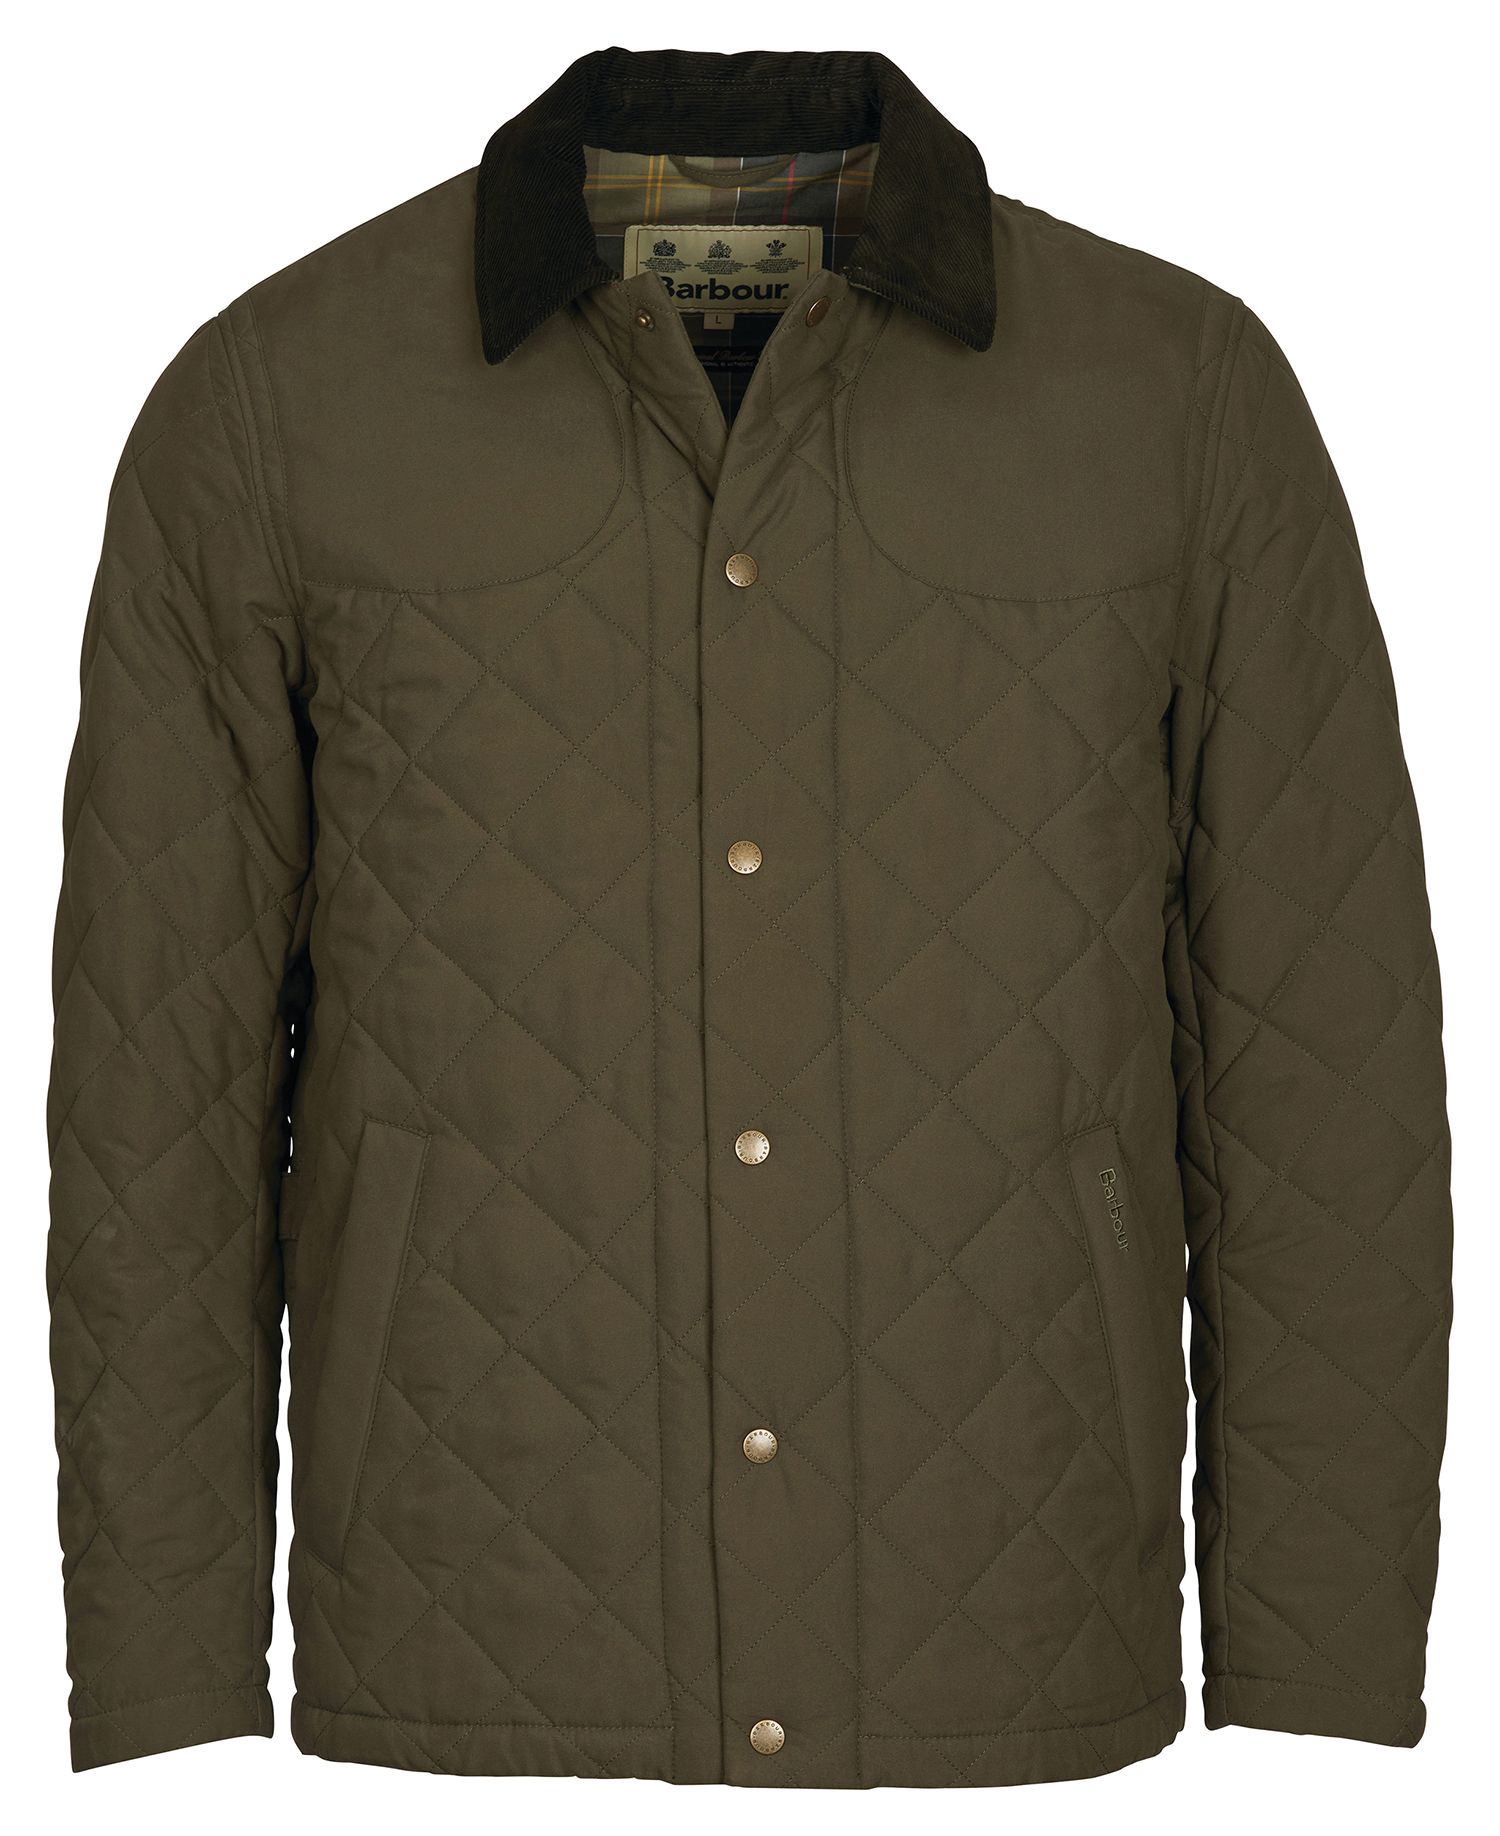 Barbour Helmsley Quilt - Army Green SeriousCountrySports.com